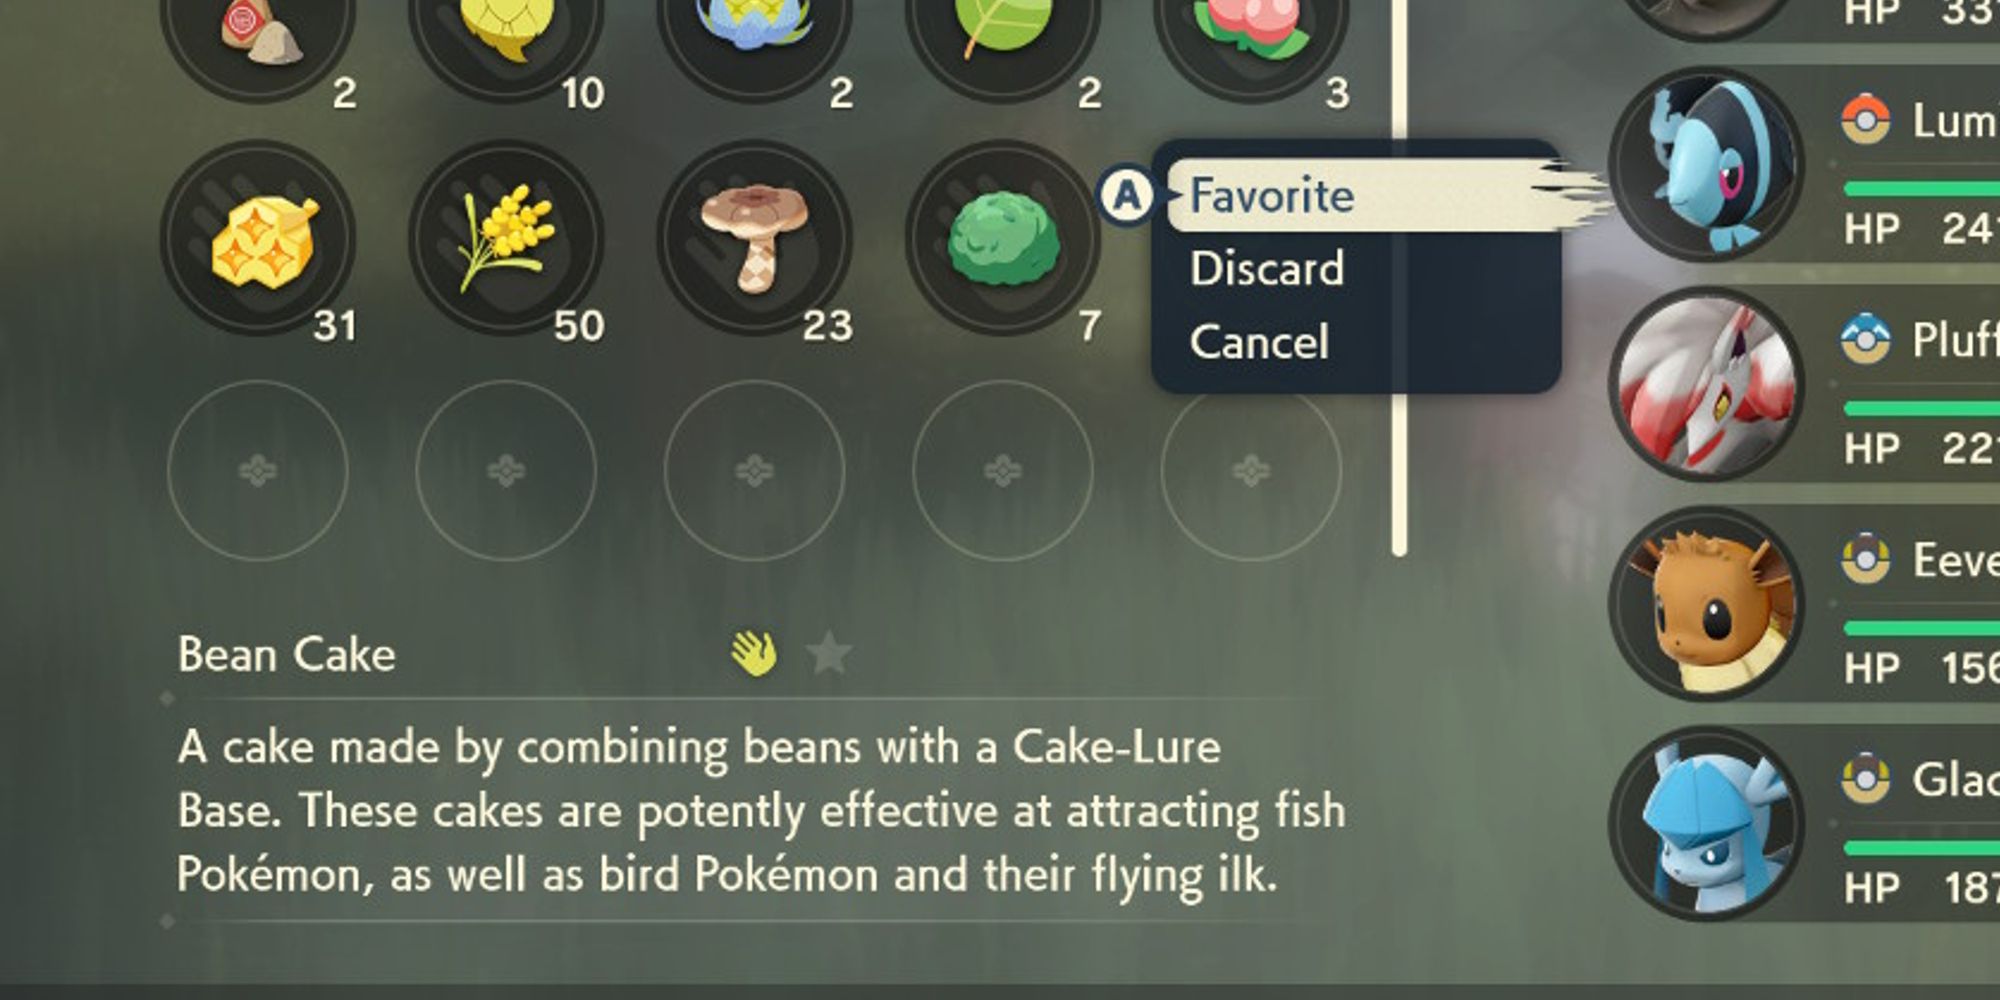 bean cake selected in player inventory